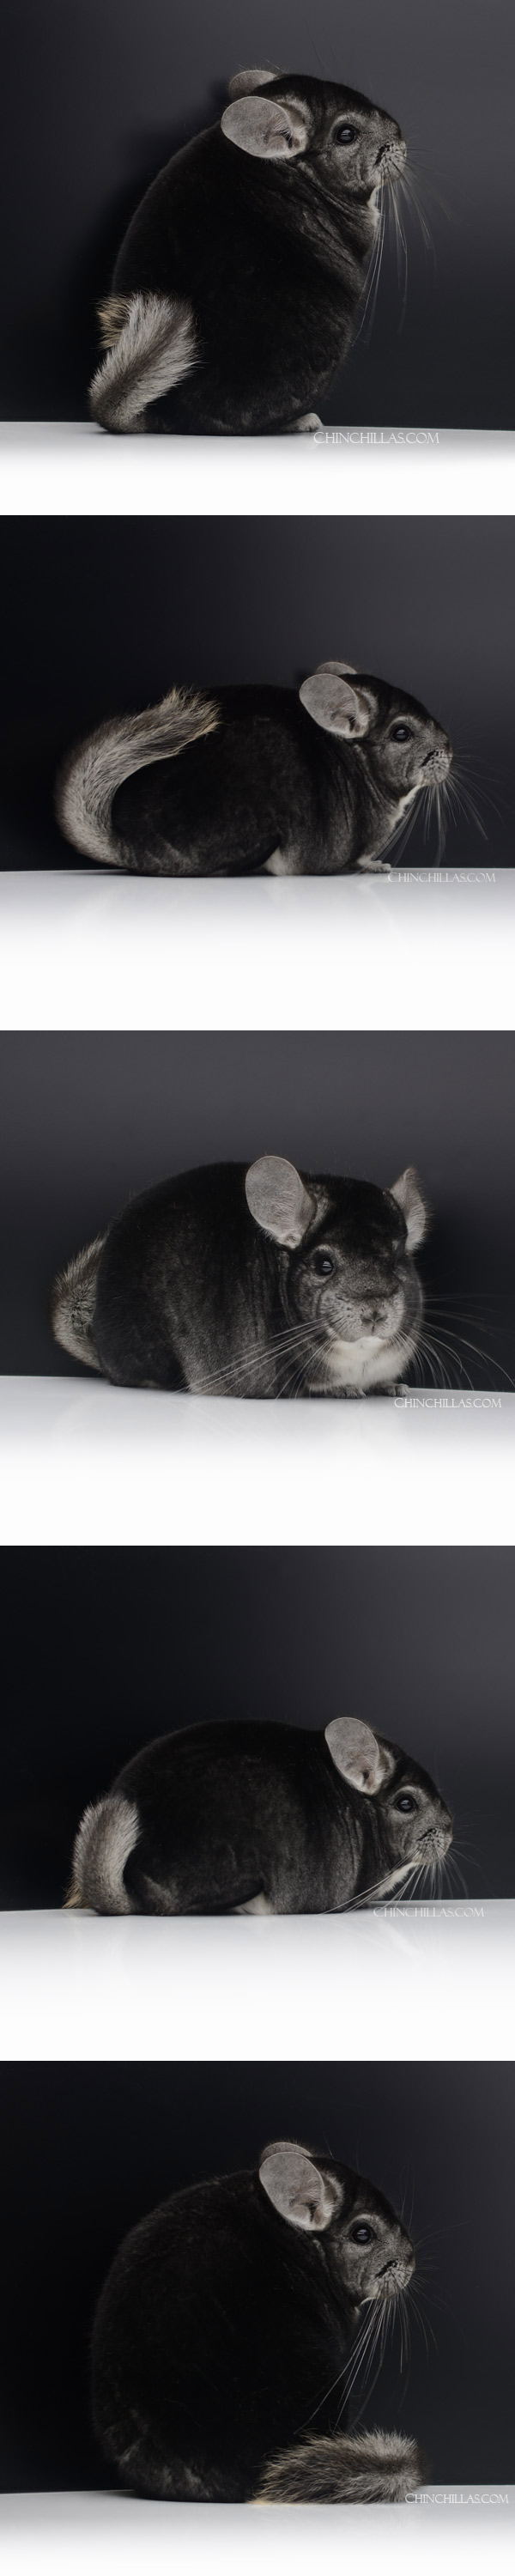 Chinchilla or related item offered for sale or export on Chinchillas.com - 23029 Extra Dark Herd Improvement Quality Standard Male Chinchilla